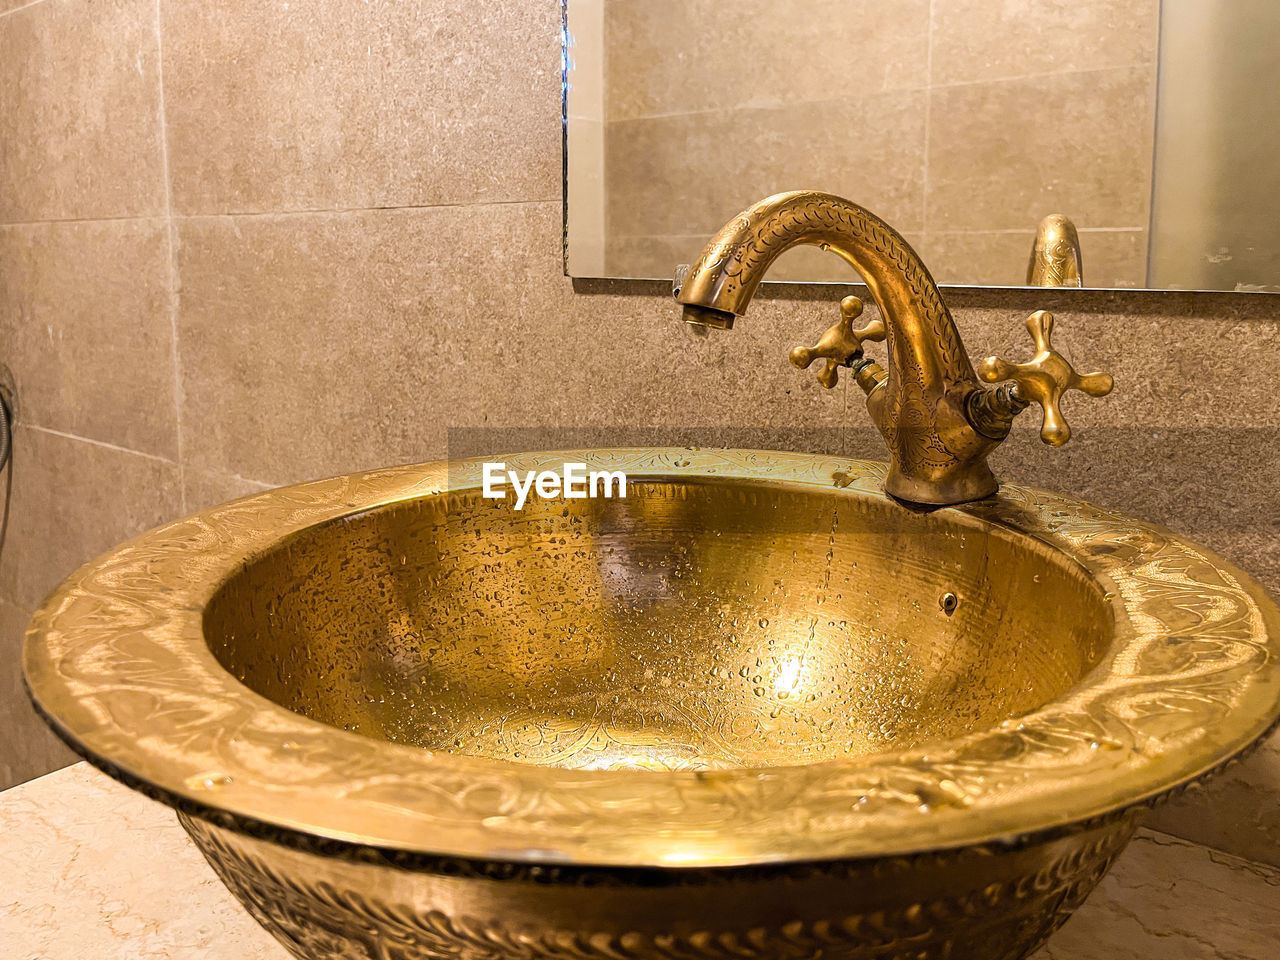 home, domestic room, faucet, bathroom, sink, household equipment, hygiene, domestic bathroom, plumbing fixture, home interior, metal, indoors, tap, flooring, wealth, luxury, wash bowl, tile, no people, container, nature, cleaning, household fixture, purity, water, room, architecture, home showcase interior, bathroom sink, close-up, washing, shiny, elegance